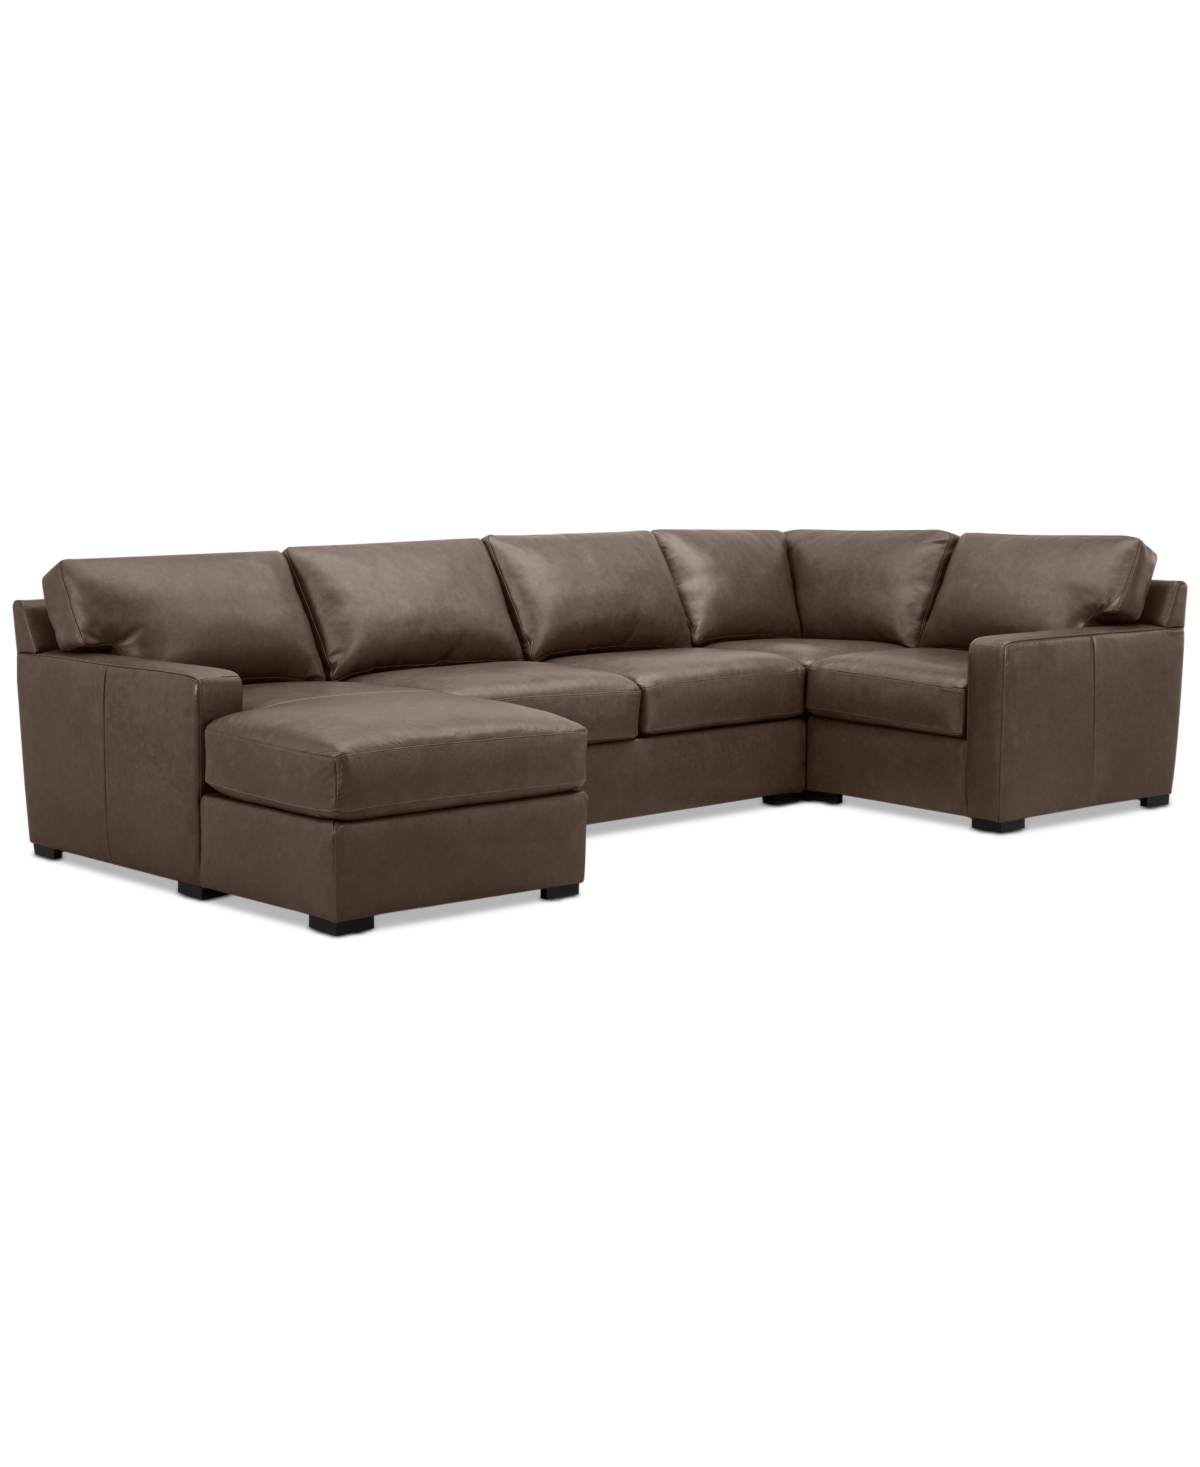 Macy's Radley 136" 4-pc. Leather Square Corner Modular Chaise Sectional, Created For  In Chocolate